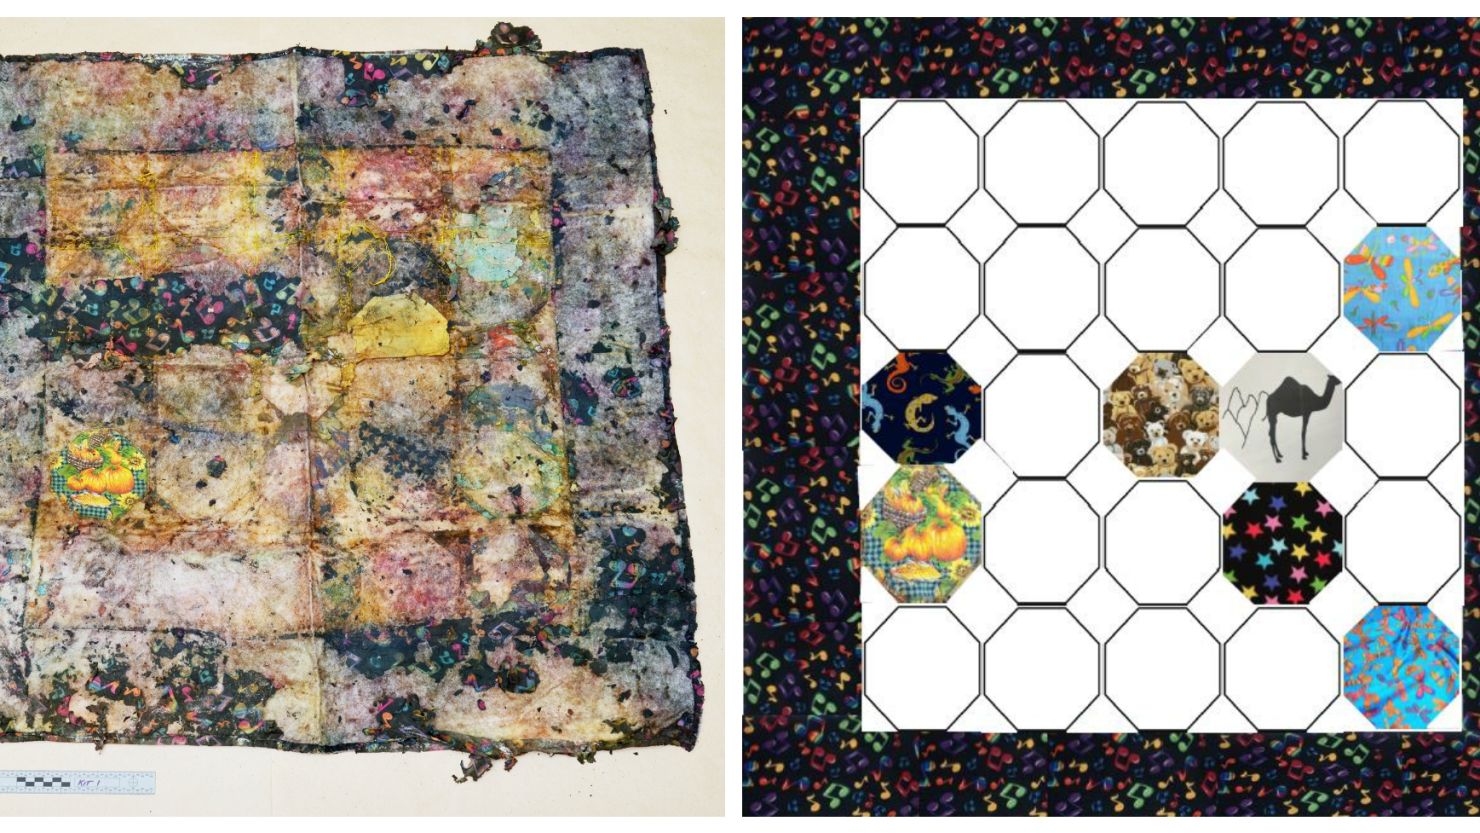 The 90cm by 90cm quilt found with the child's body, with seven patches digitally enhanced on right.